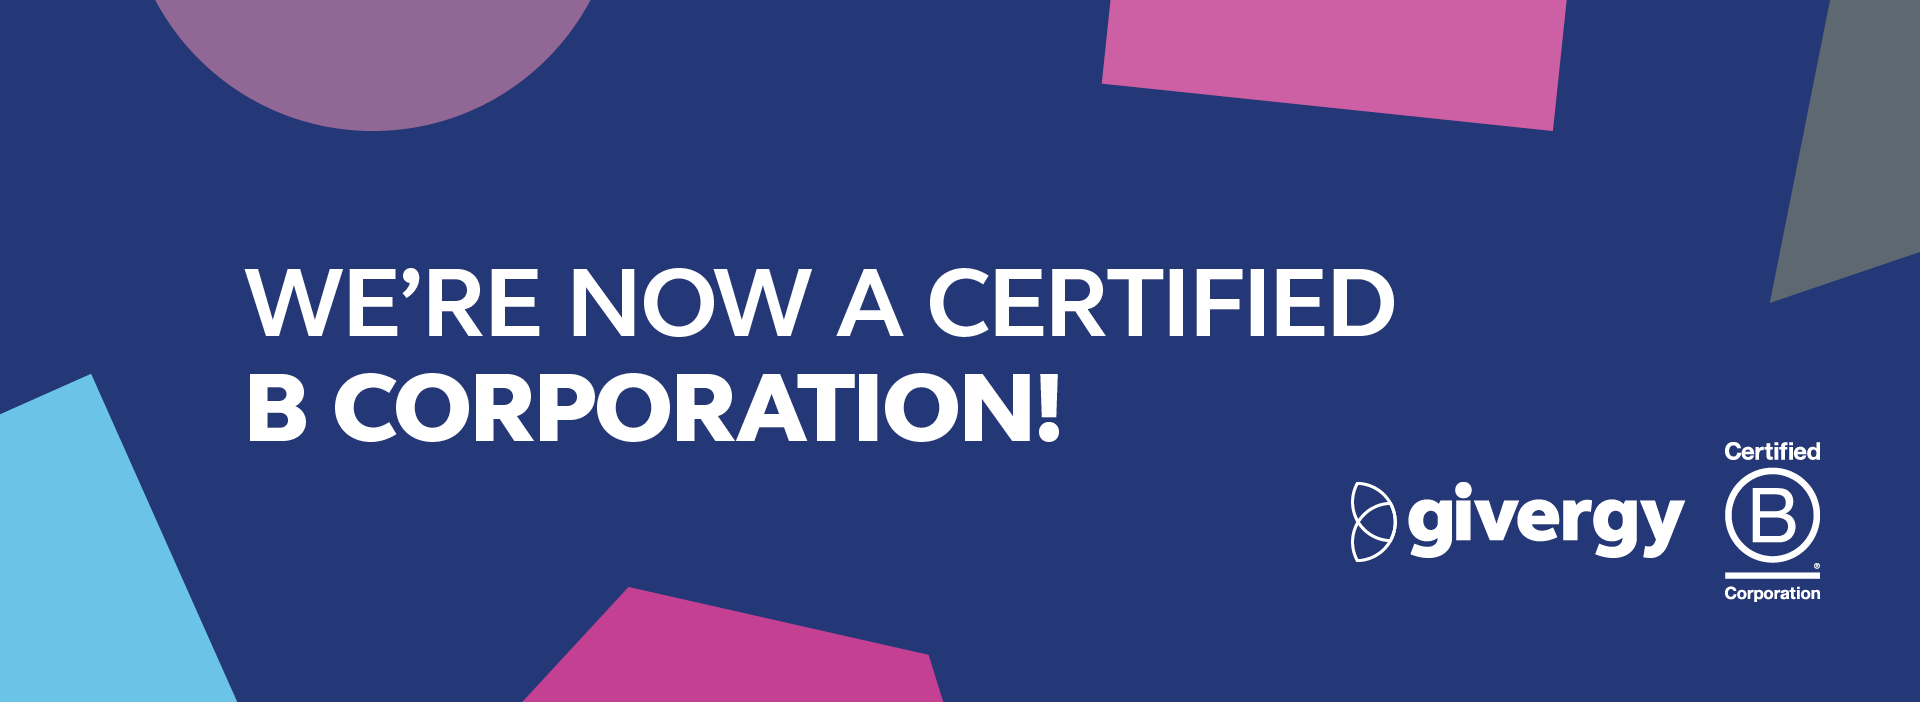 We're now a certified B Corportation!